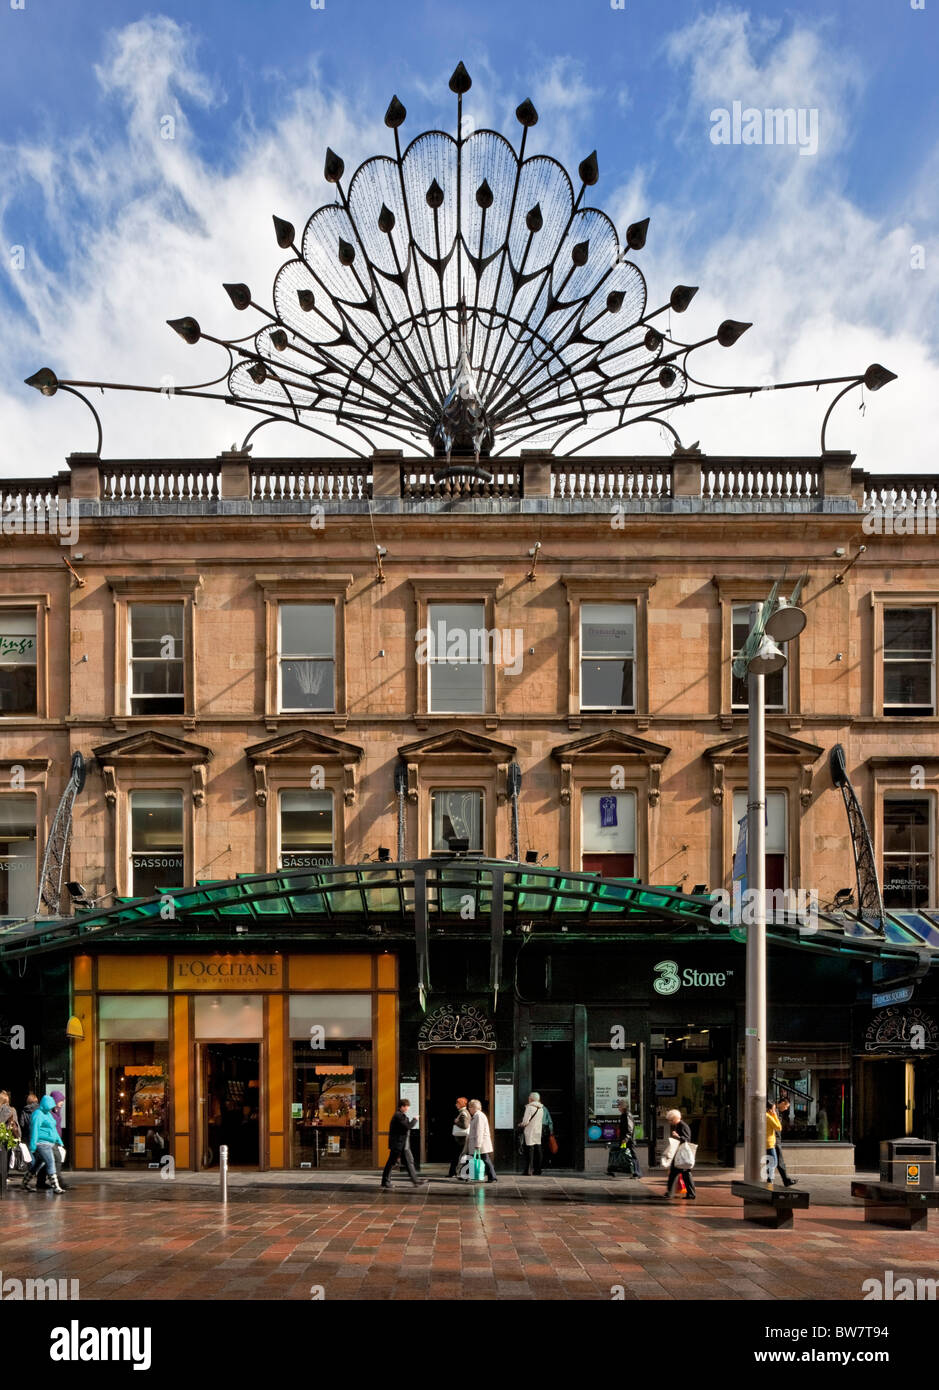 Princes Square, an art nouveau style shopping Mall in Glasgow Stock Photo